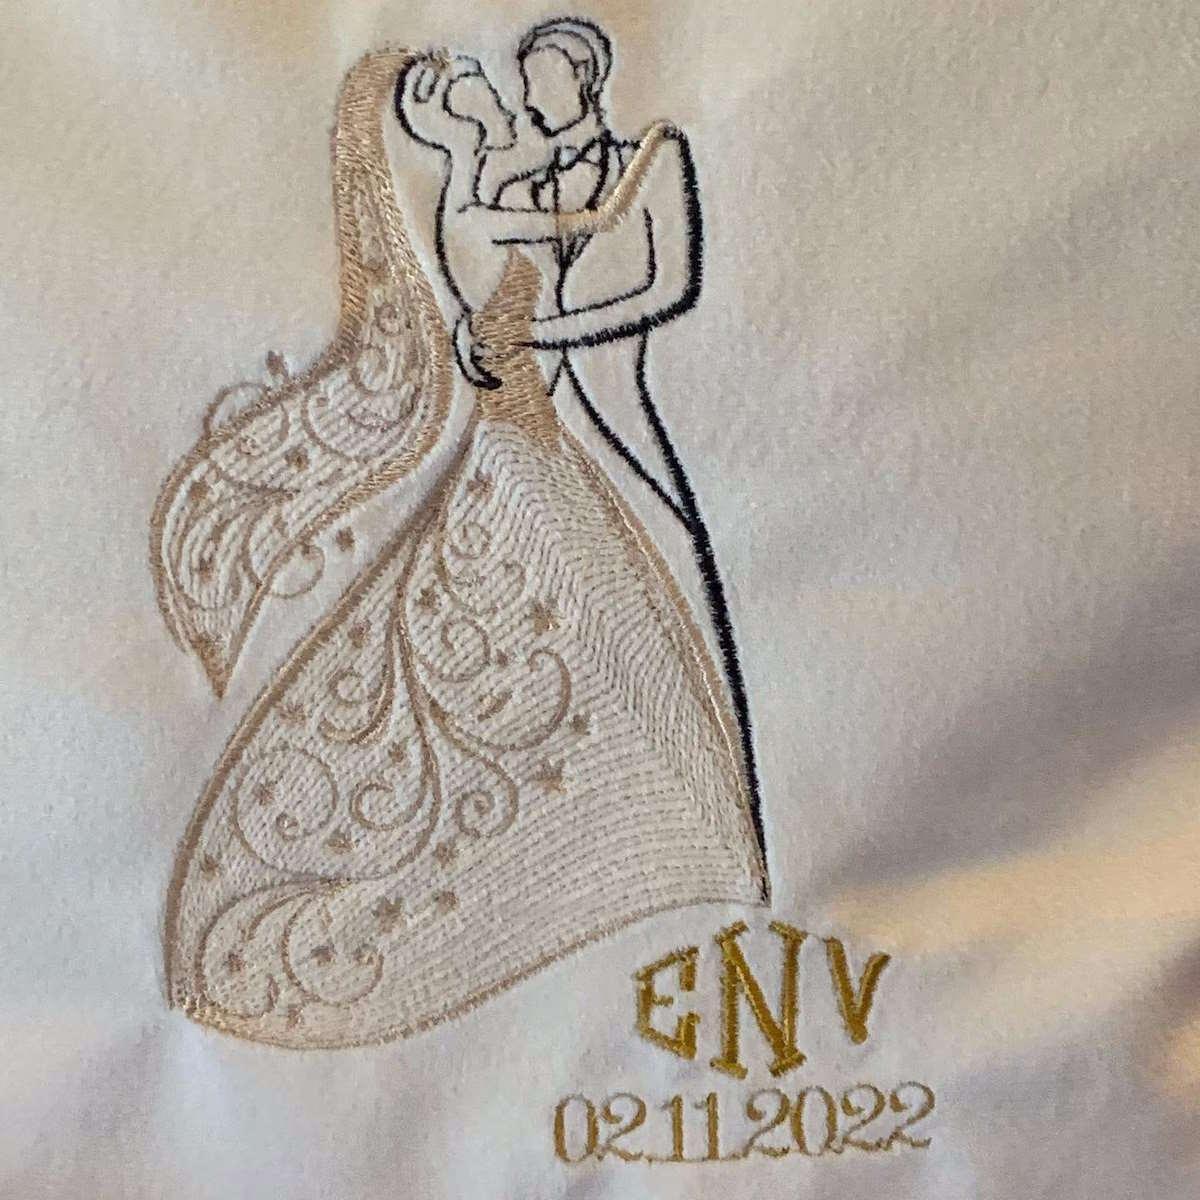 https://forum.embroideres.com/uploads/monthly_2023_07/large.Married-couple-embroidery-design-finished.jpg.7a0d71d5397443819bb56232de82cd52.jpg